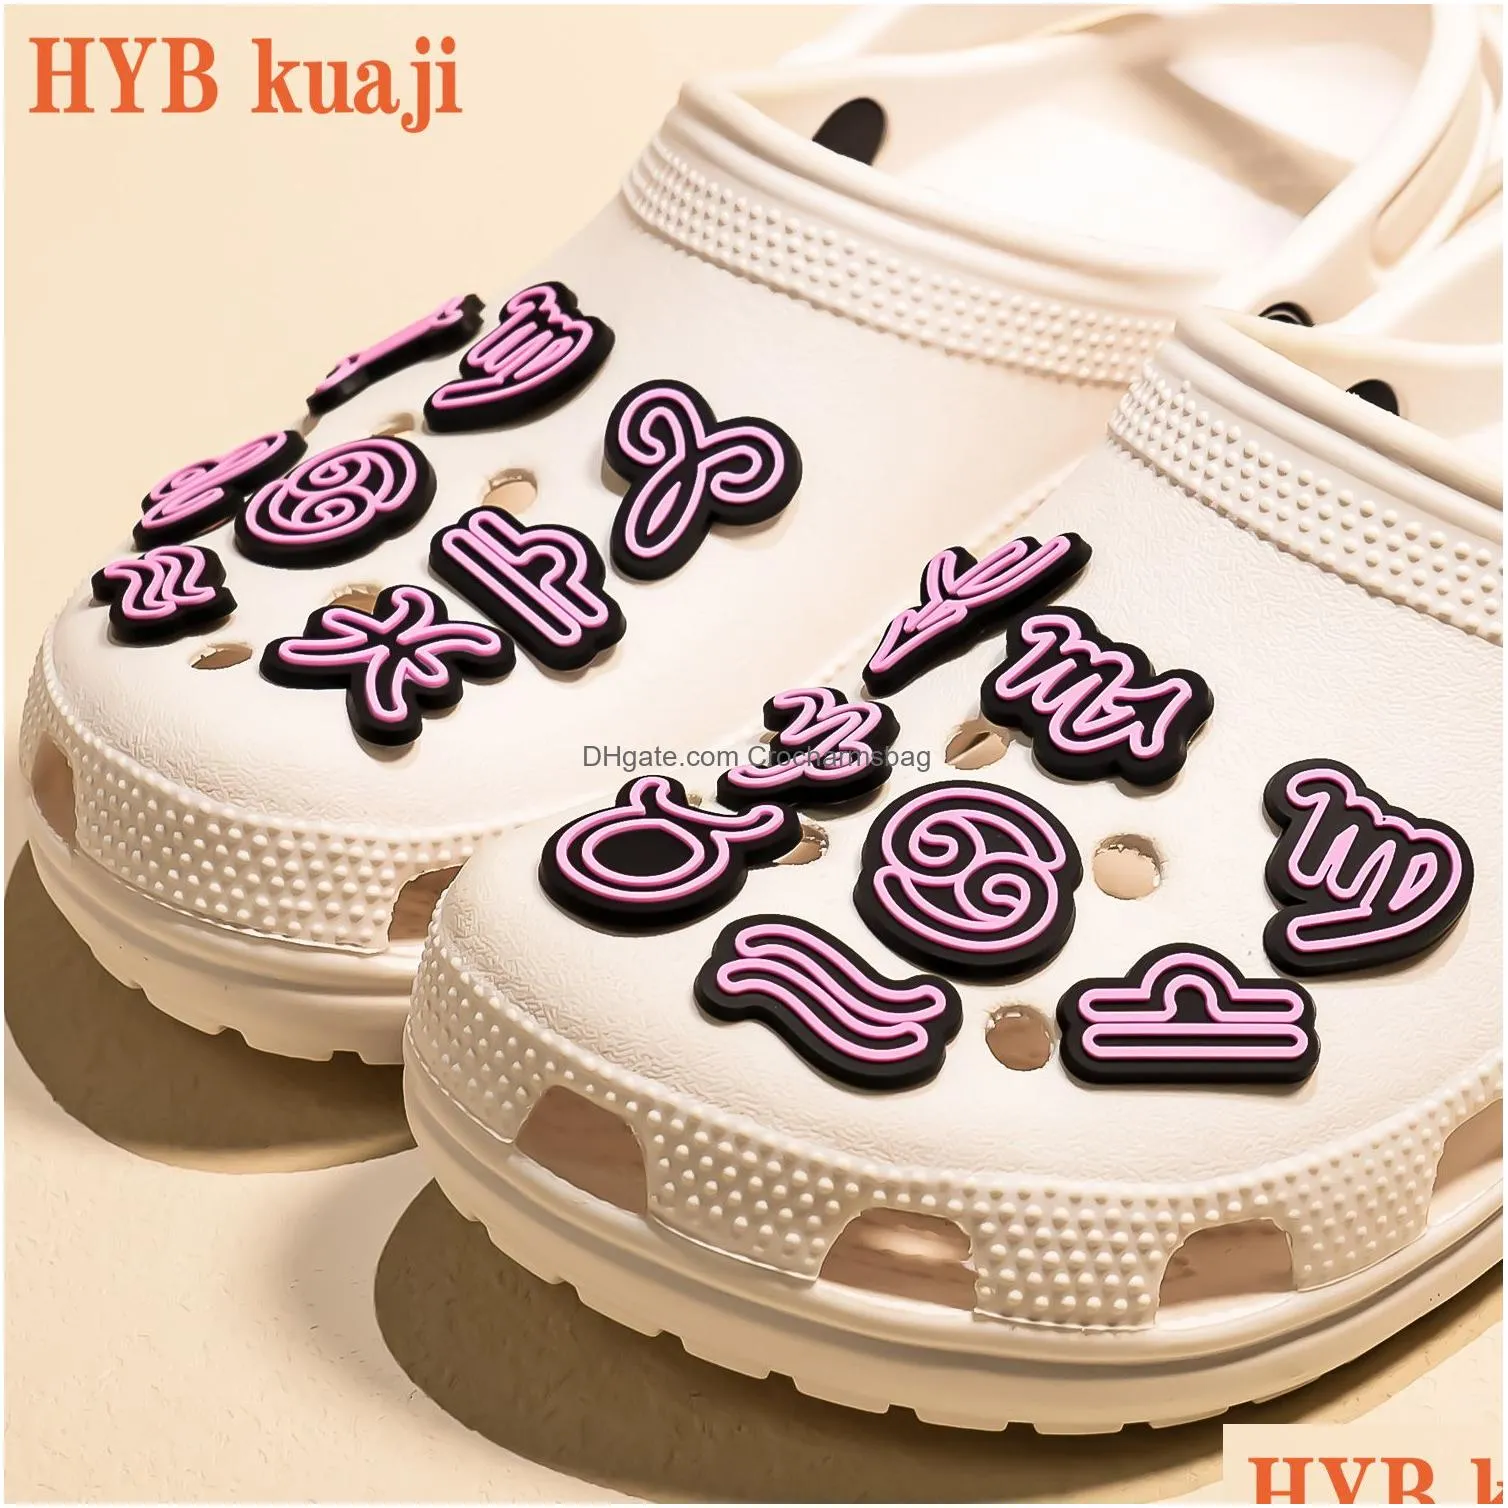 Shoe Parts & Accessories Hybkuaji Zodiac Custom Pvc Charms Wholesale Drop Delivery Shoes Dhl65